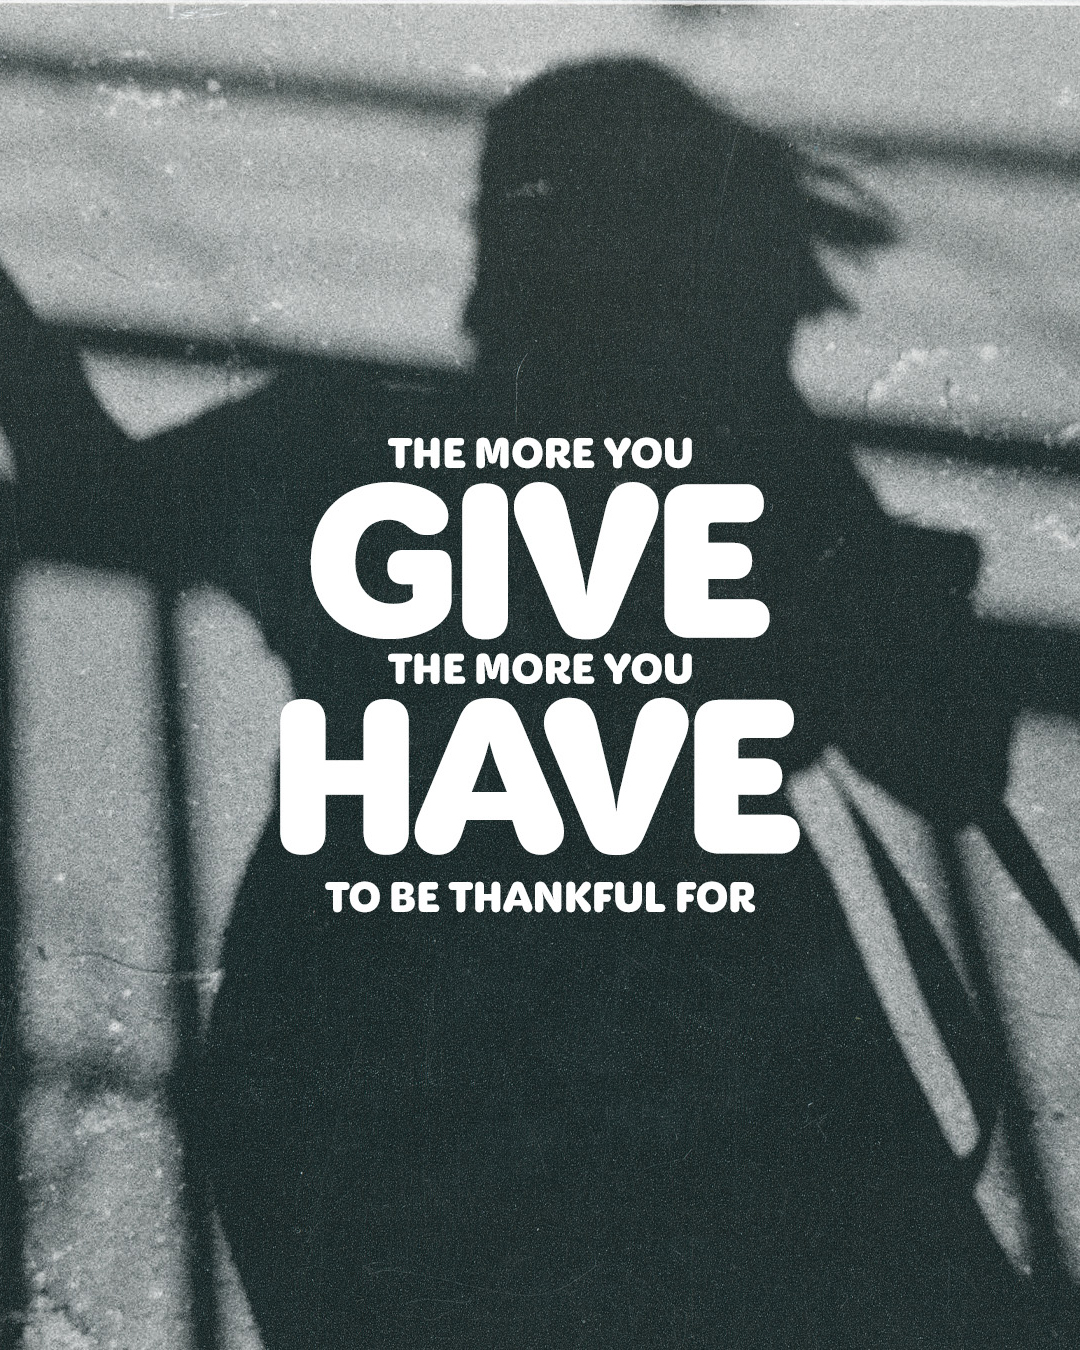 The more you give